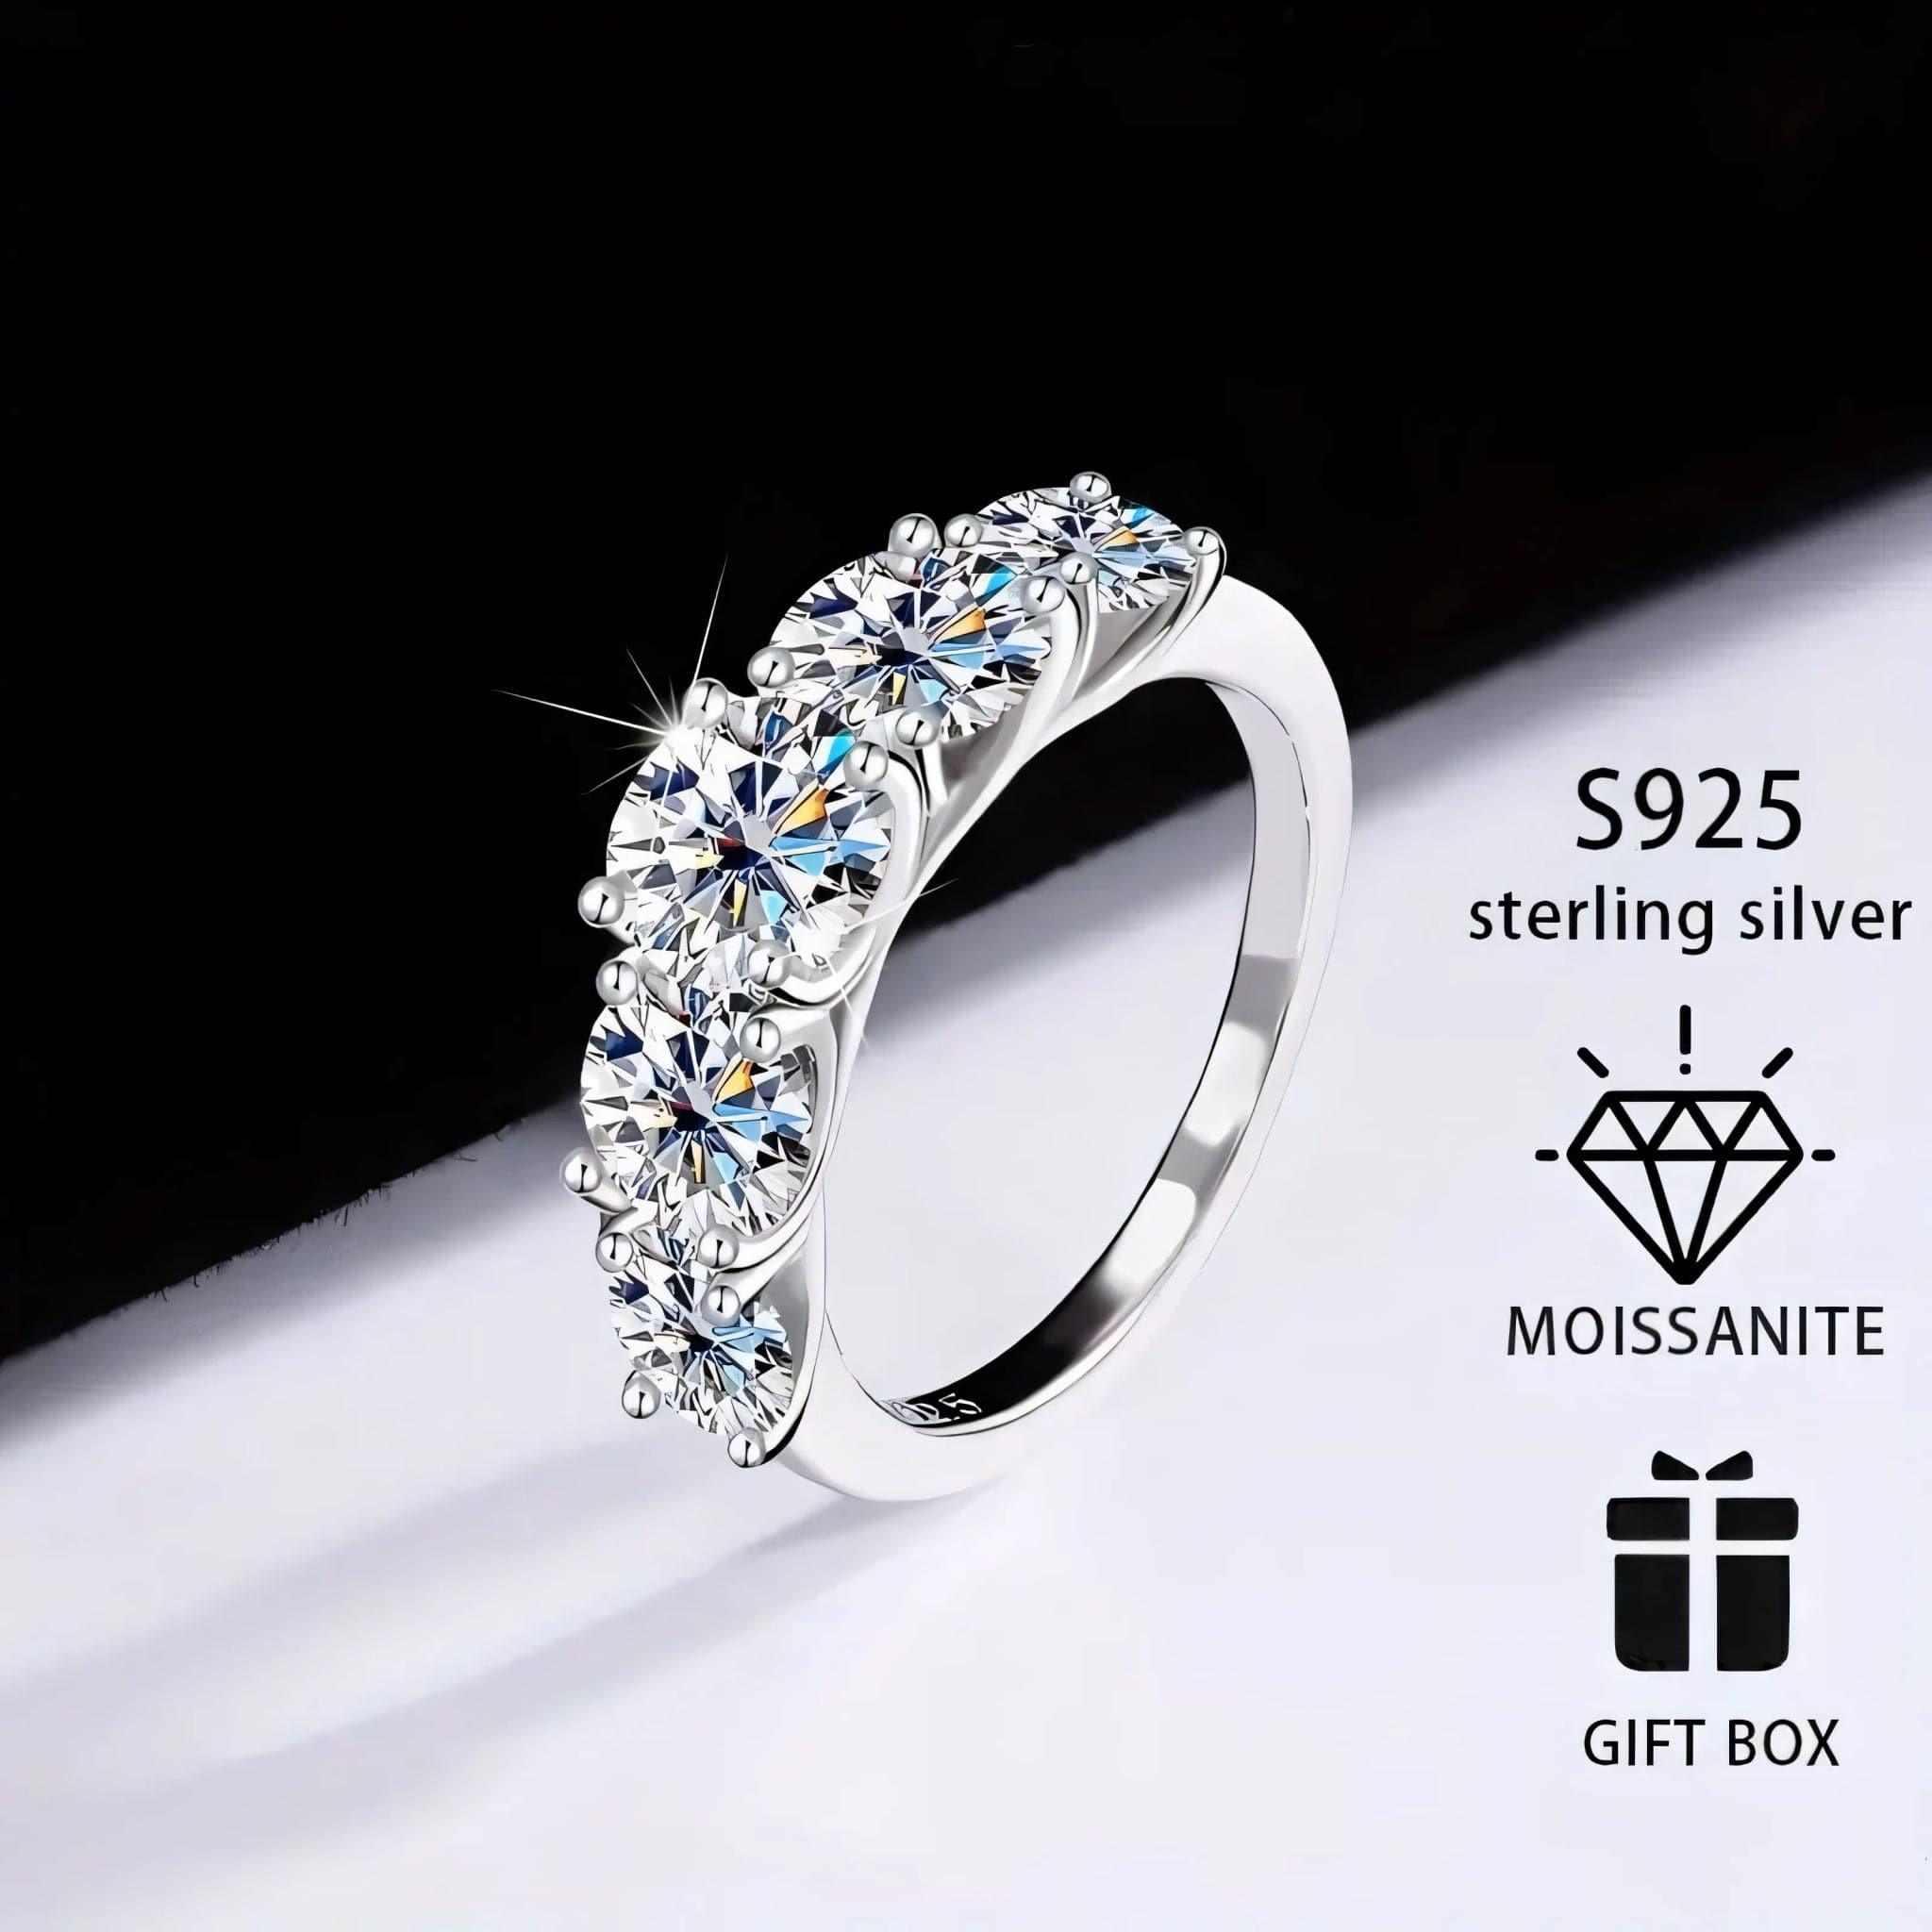 Eternal Shine 3.6ct Moissanite Engagement Ring in 925 Sterling Silver - Tremmi